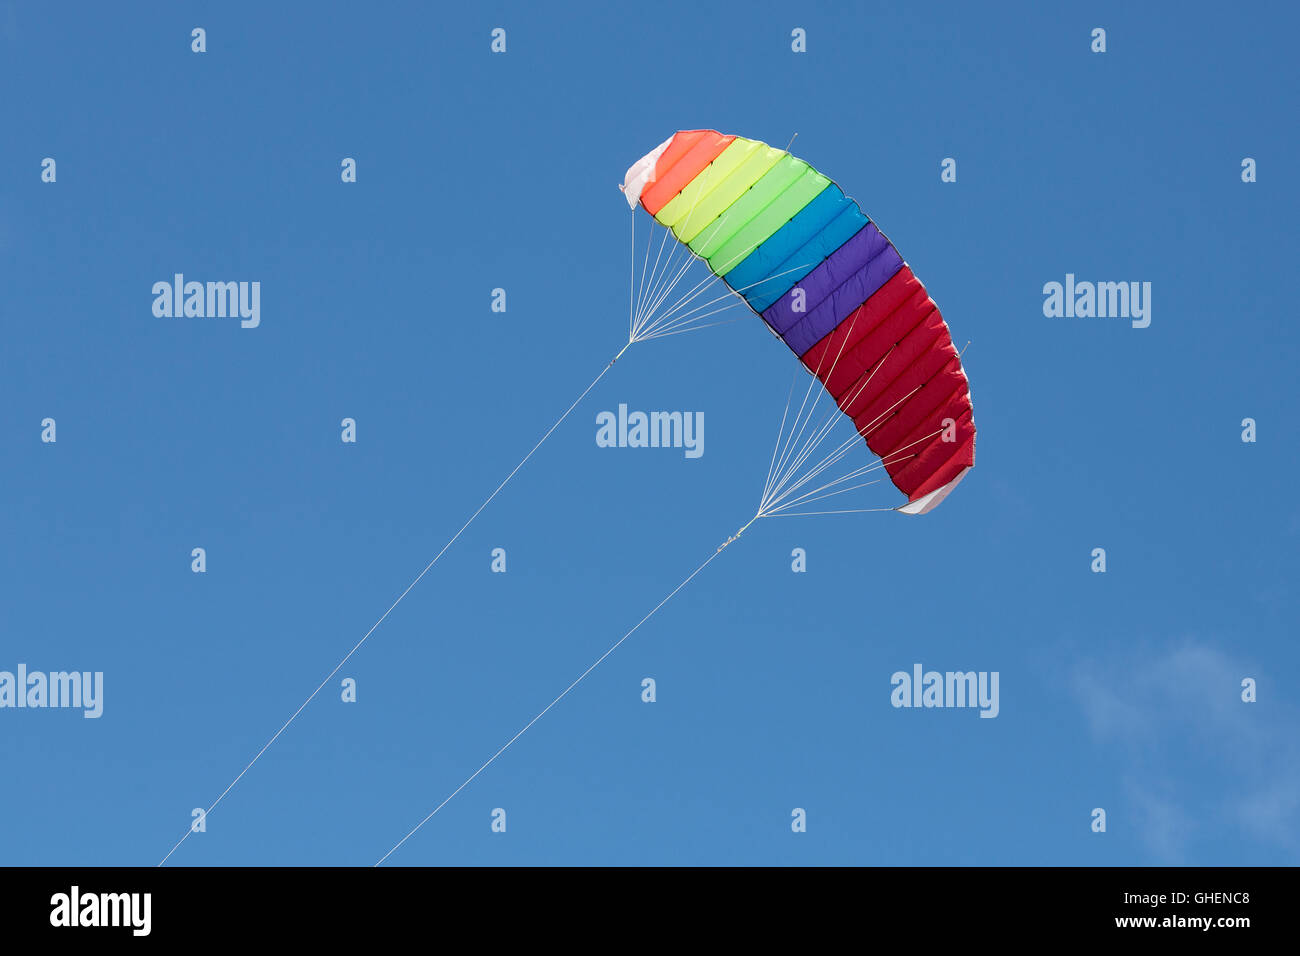 Multi-colored kite flying on a sunny day with a blue sky behind Stock Photo